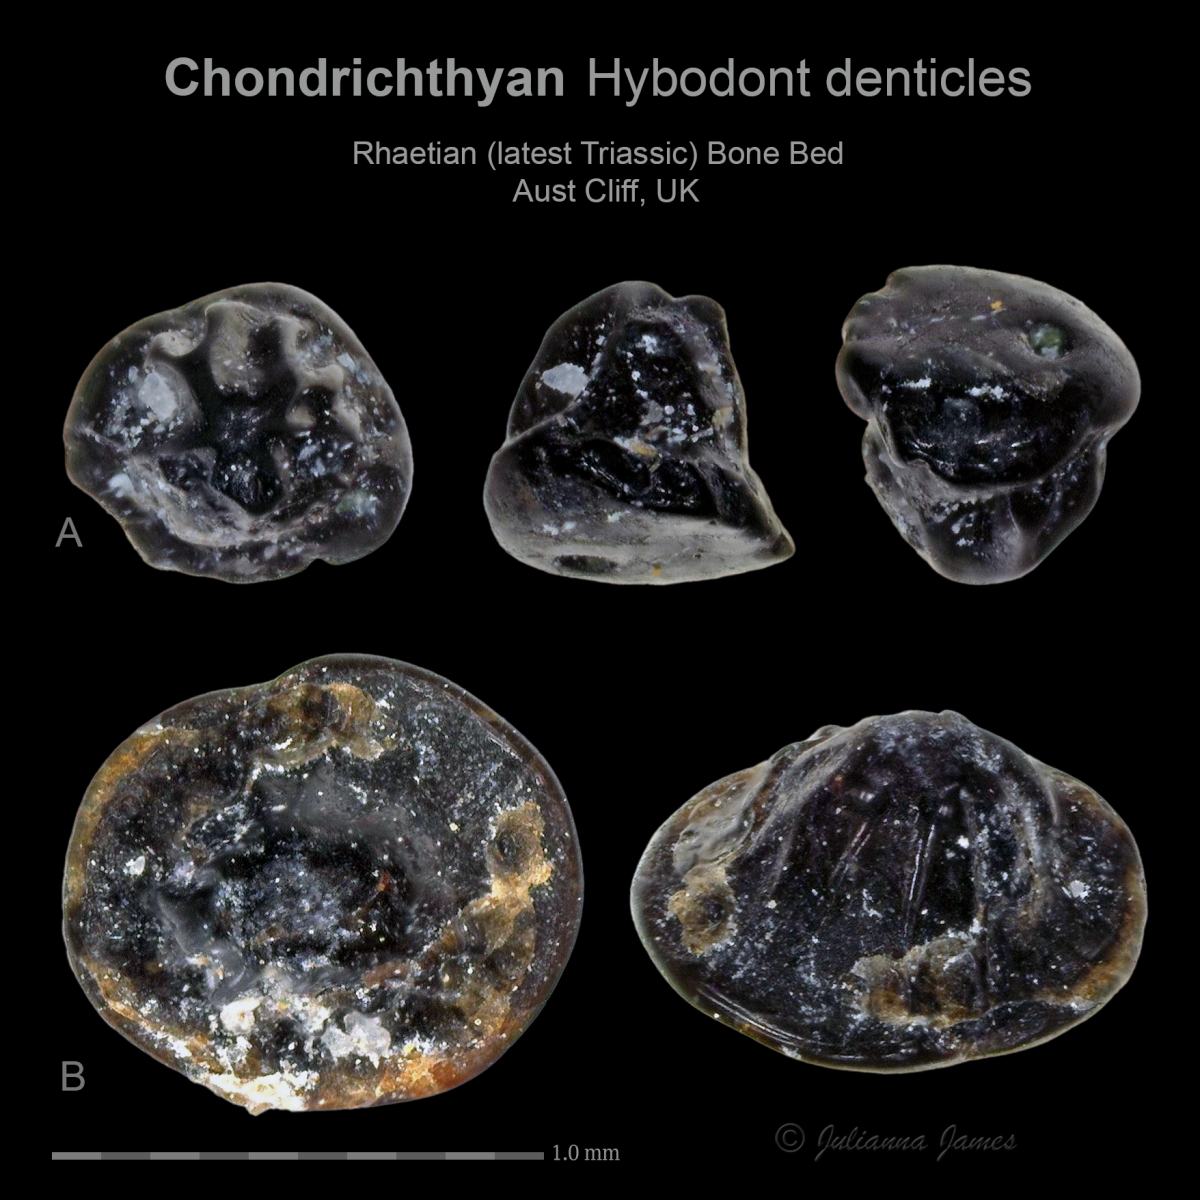 969897856_ACChondrichthyanHybodontdenticles36and61.png